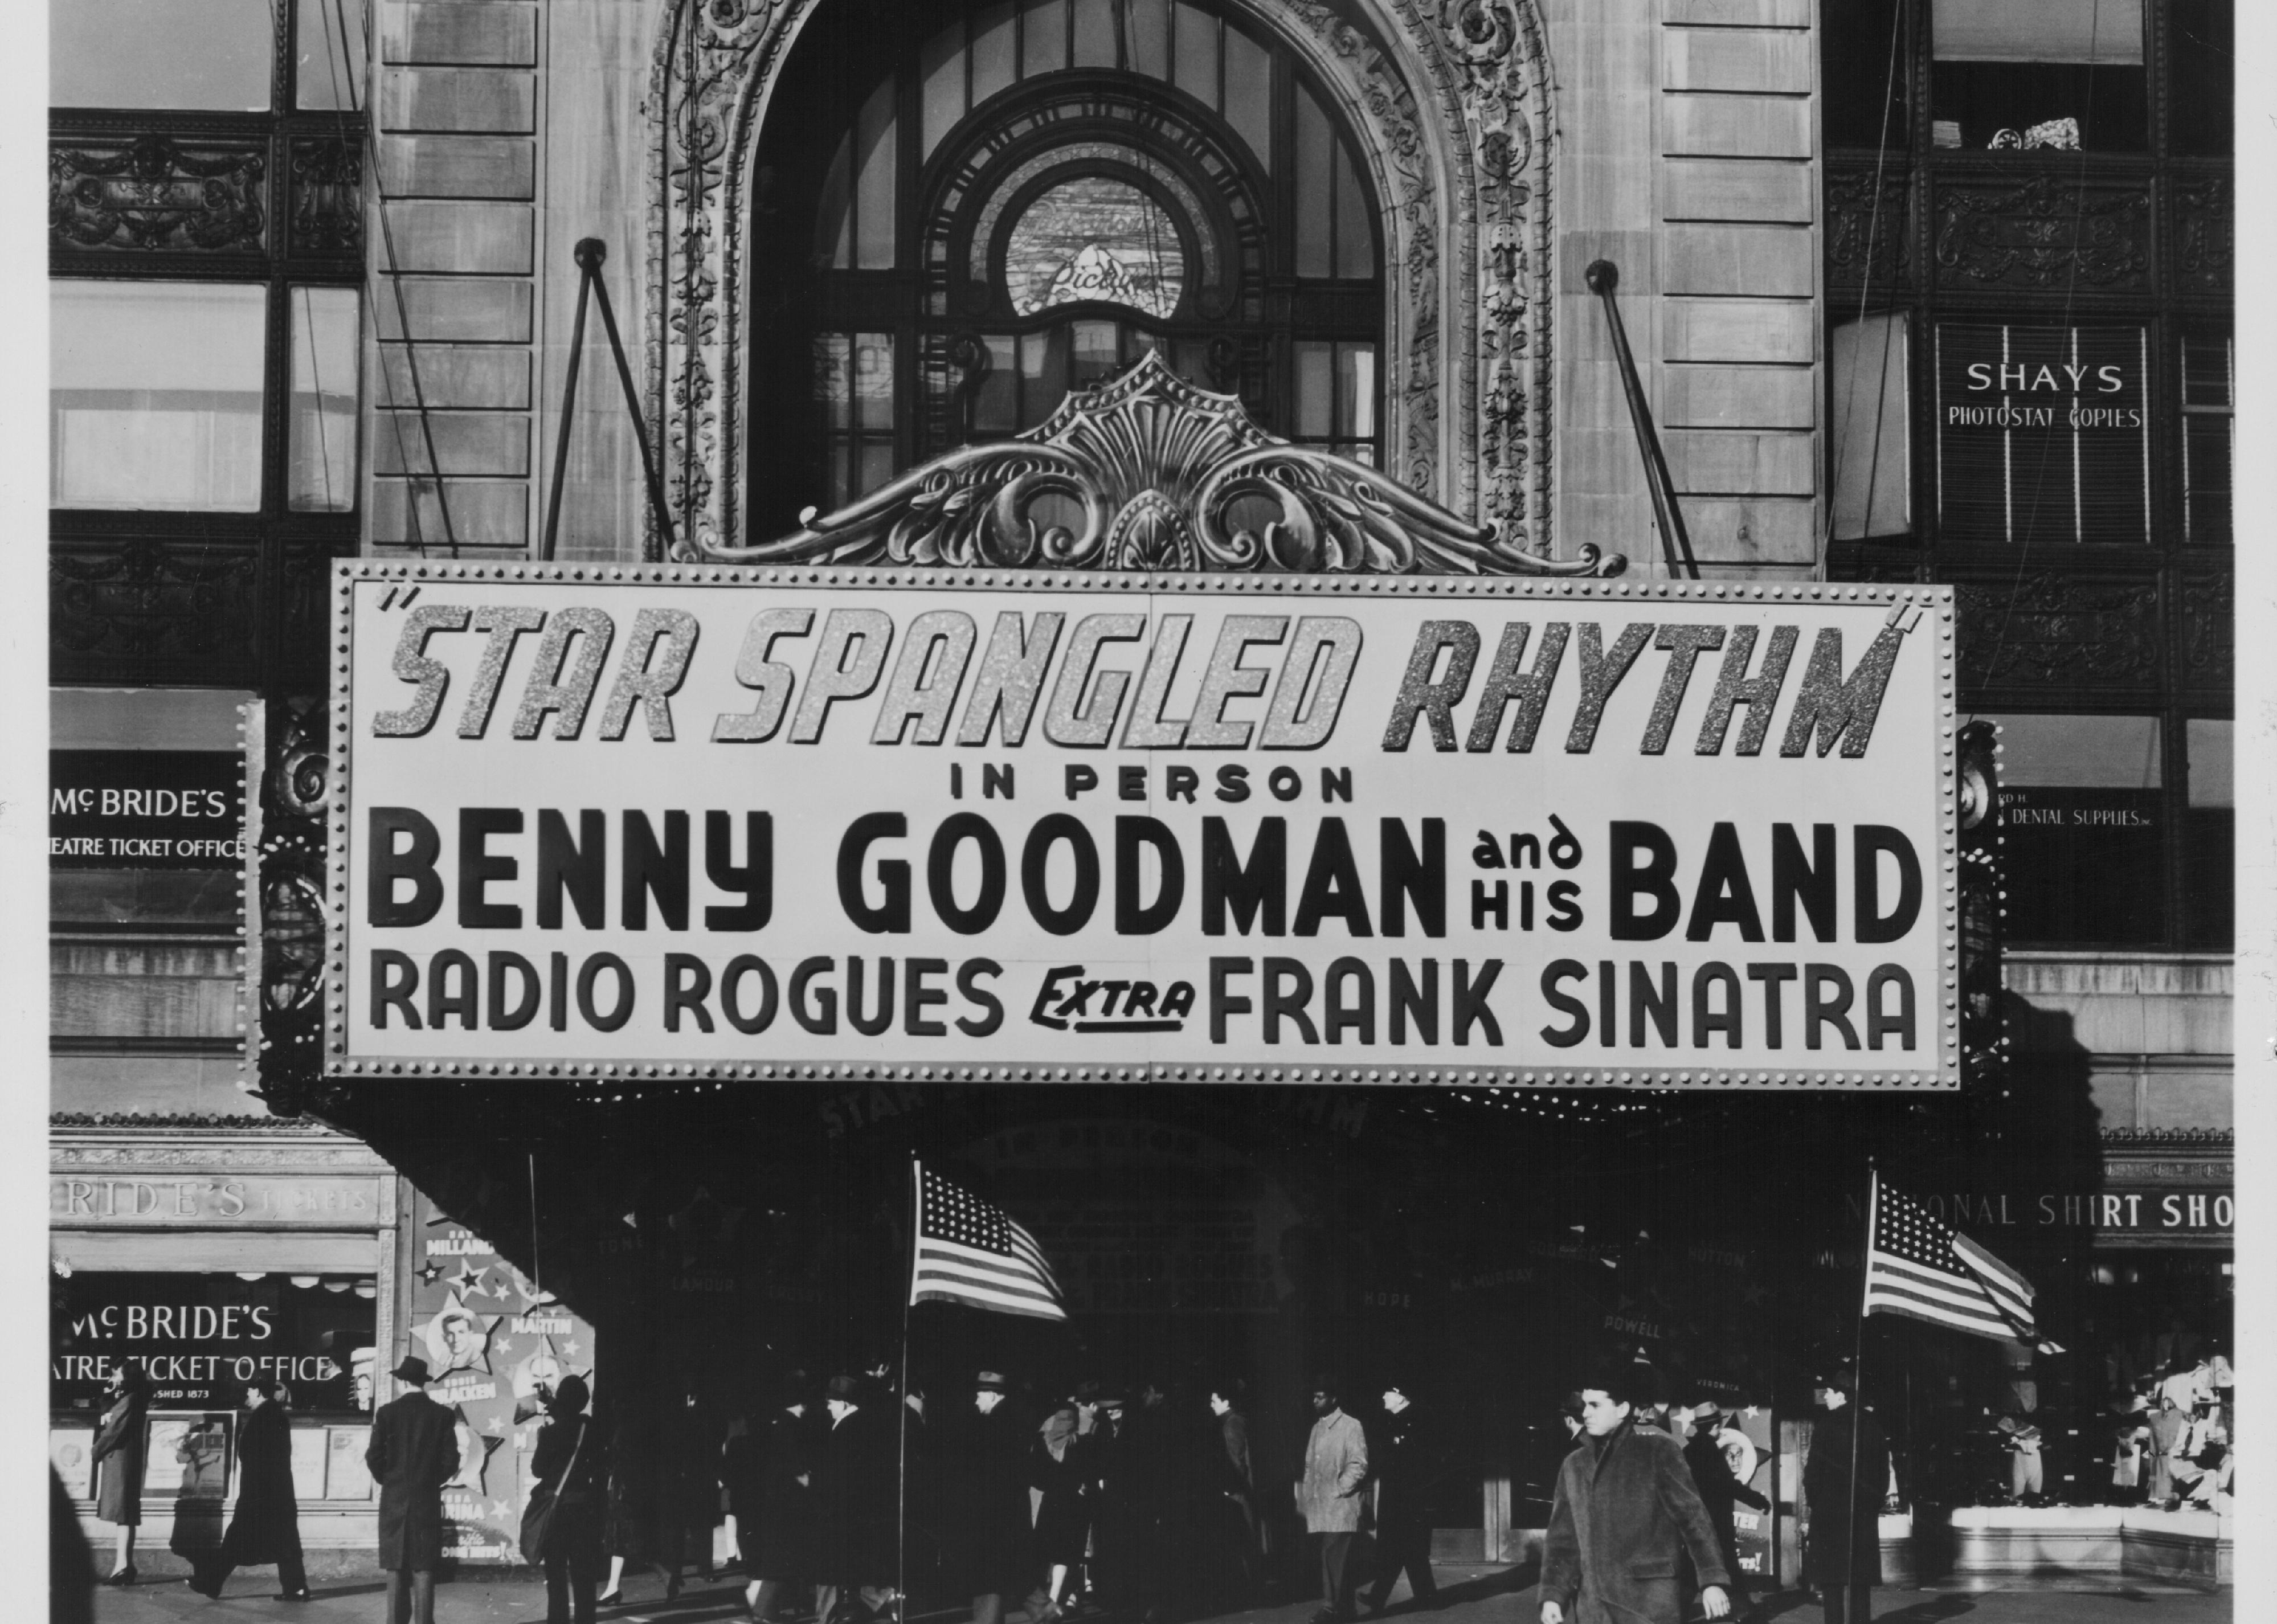 An advertisement awning outside a theater featuring Benny Goodman and Frank Sinatra.